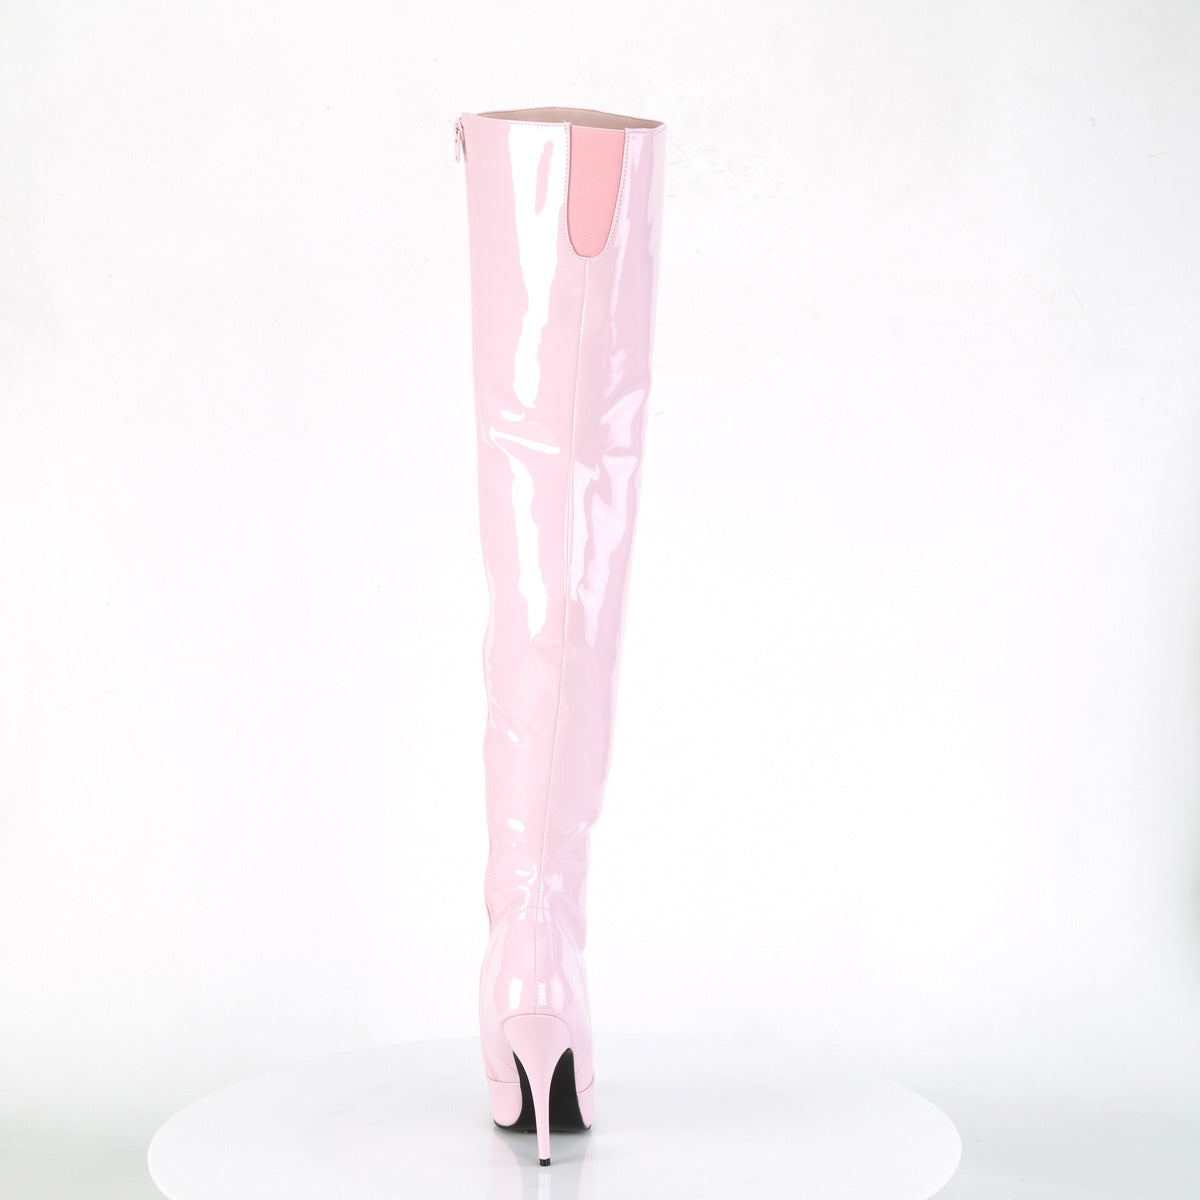 SEDUCE-3010 Baby Pink Thigh Boots